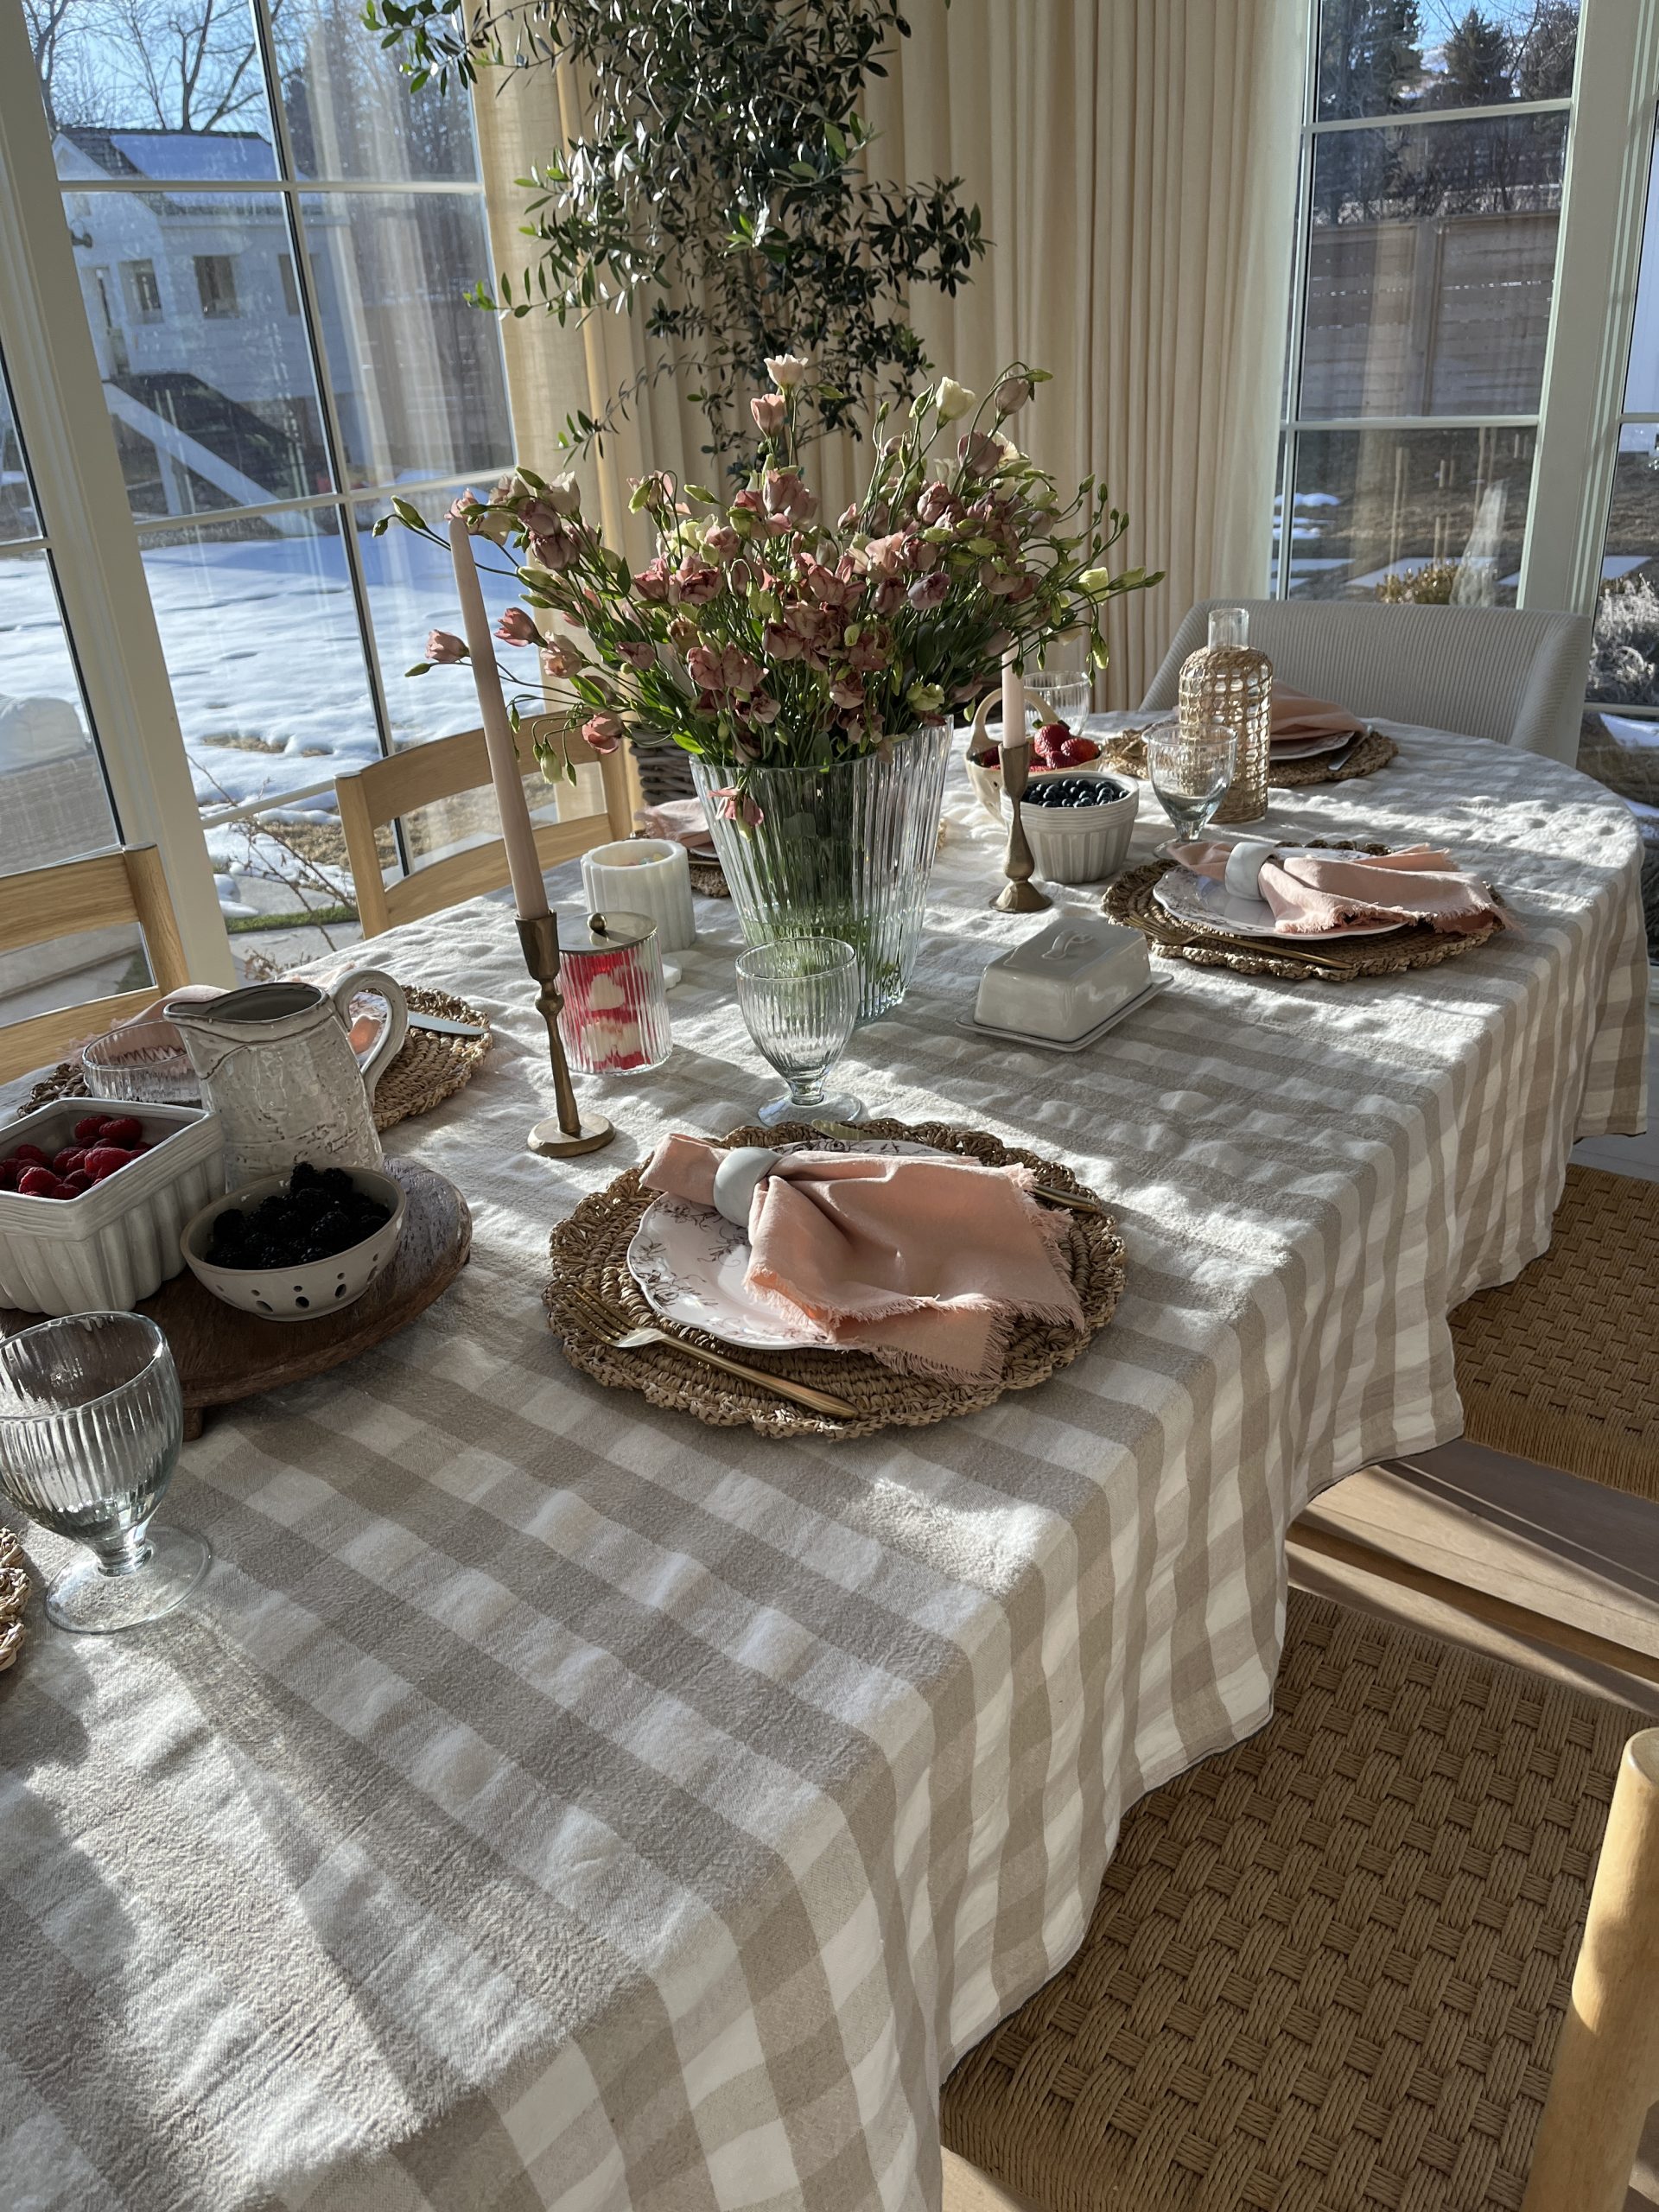 valentine's tablescape with floral arrangement, berries, servware, gingham tablecloth, woven placement, white plates, and pink napkins